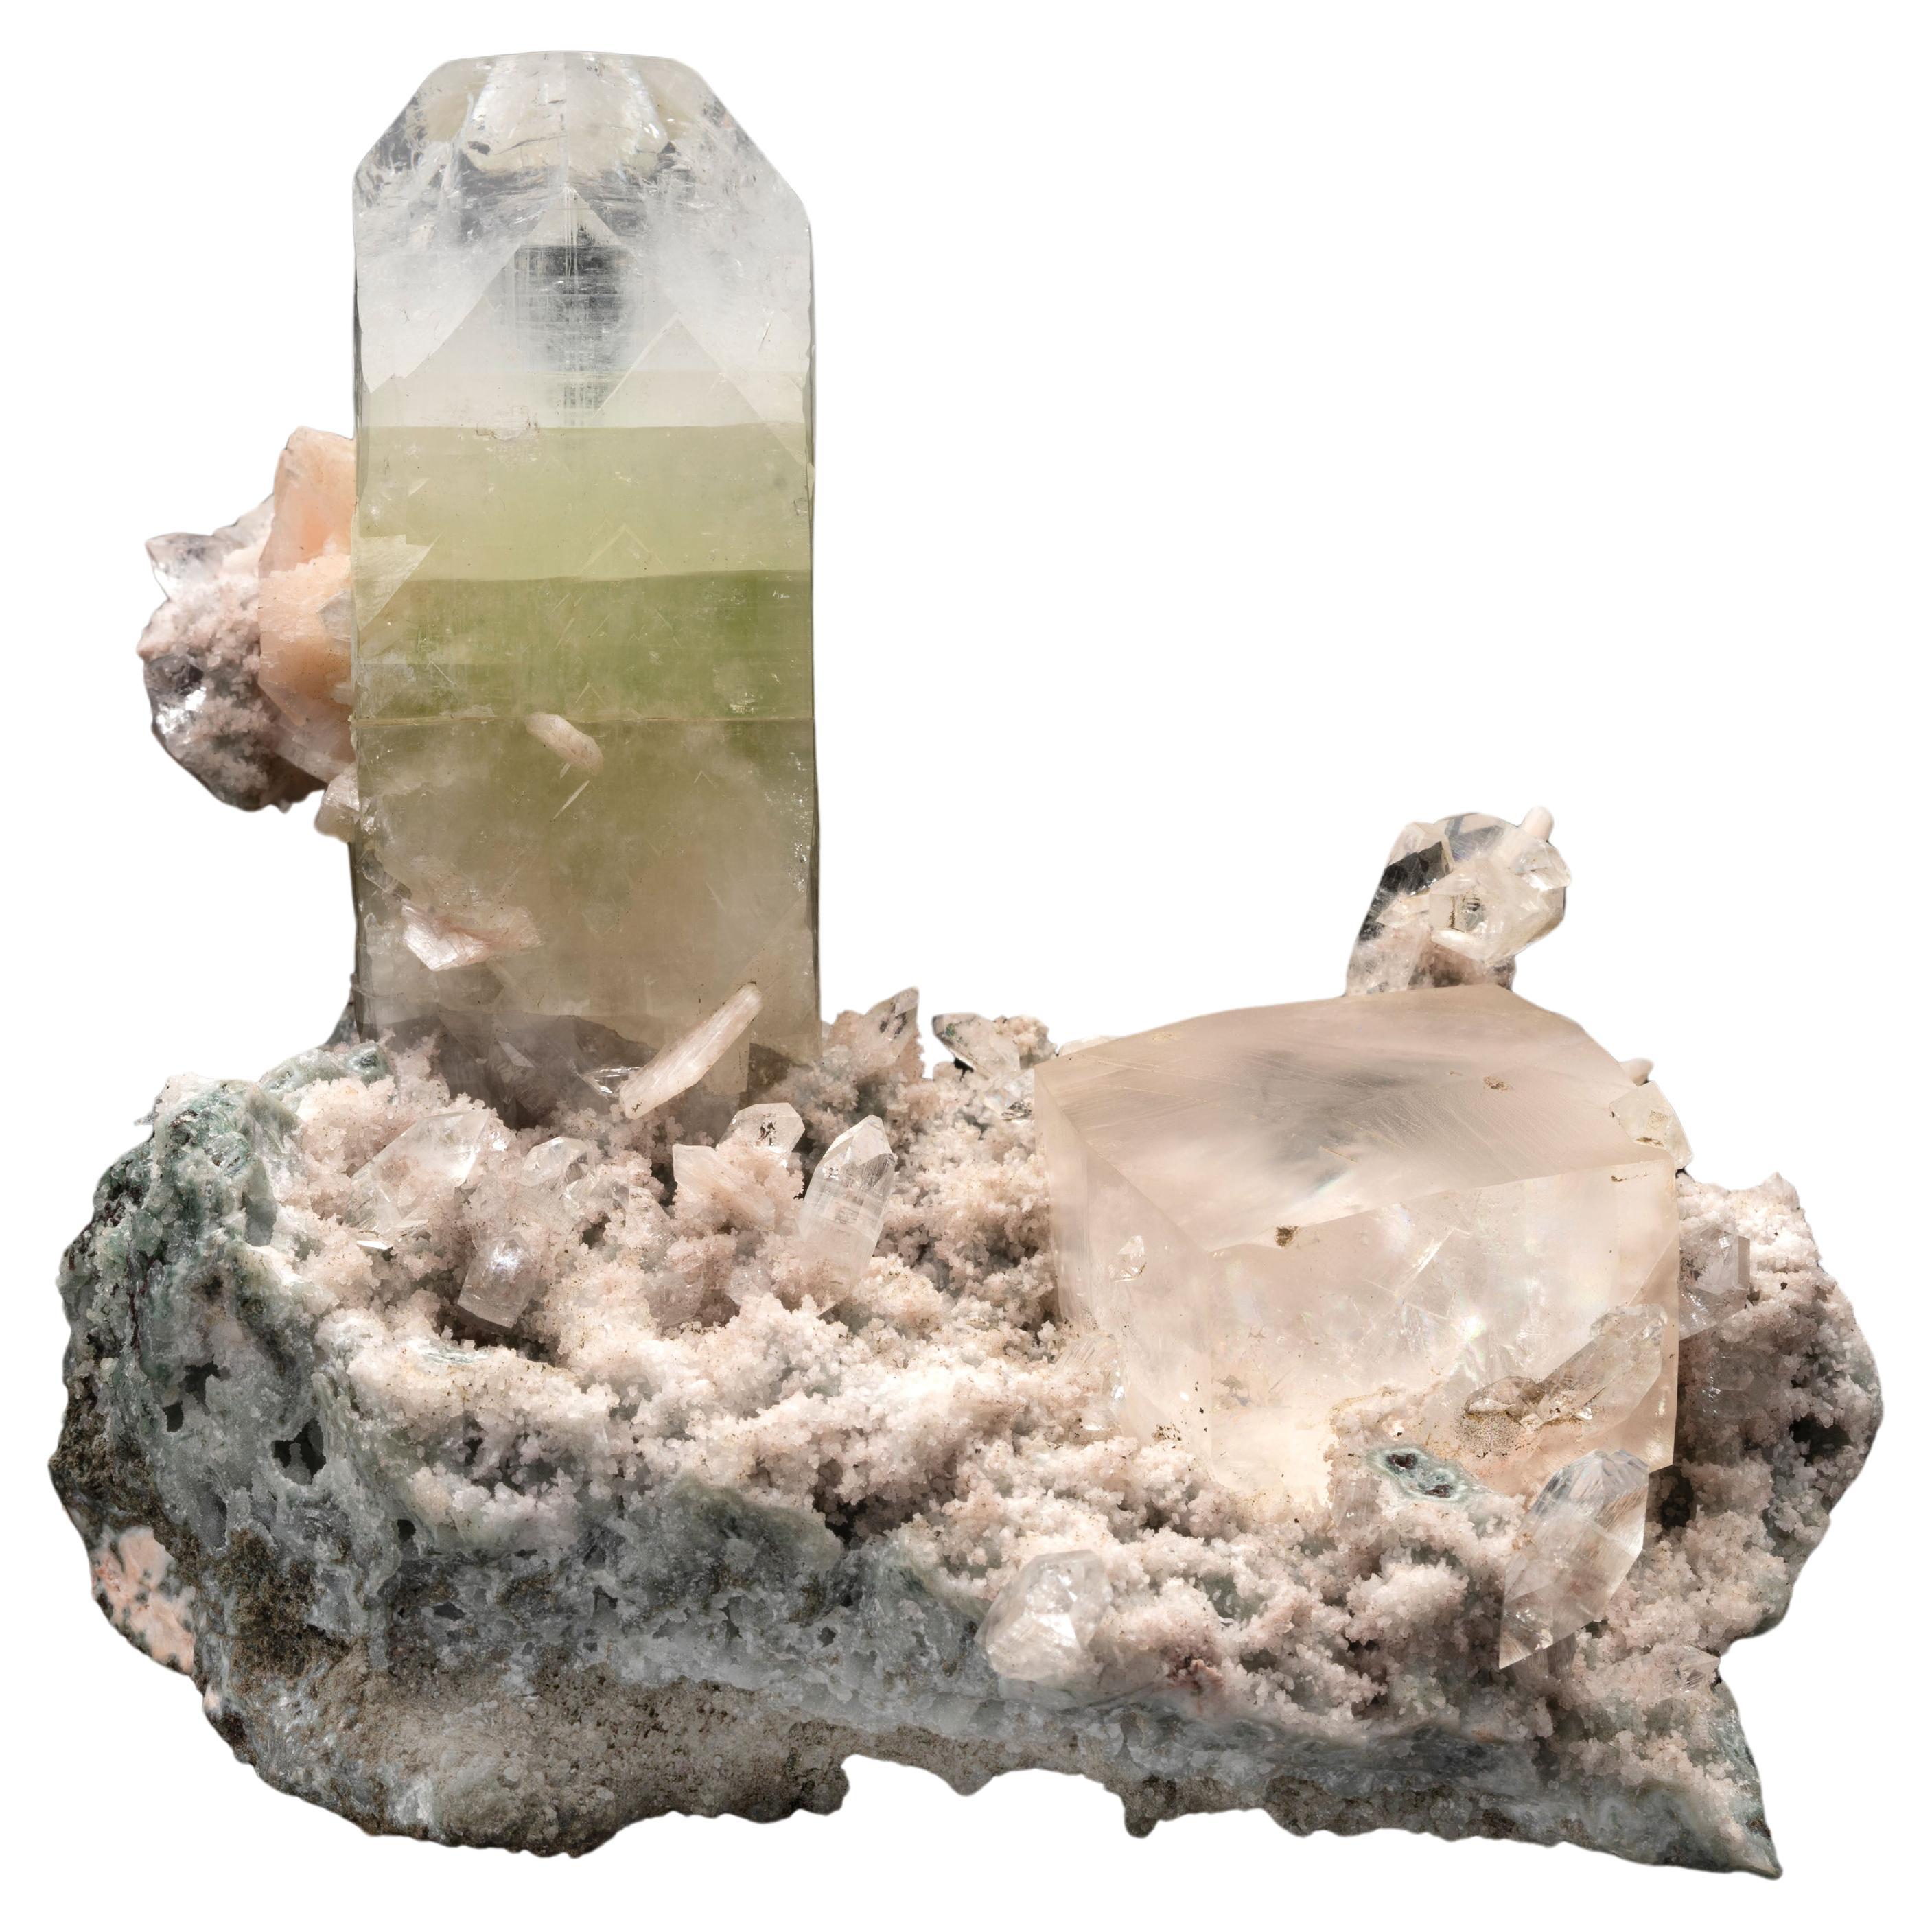 Green Apophyllite and Stilbite with Calcite